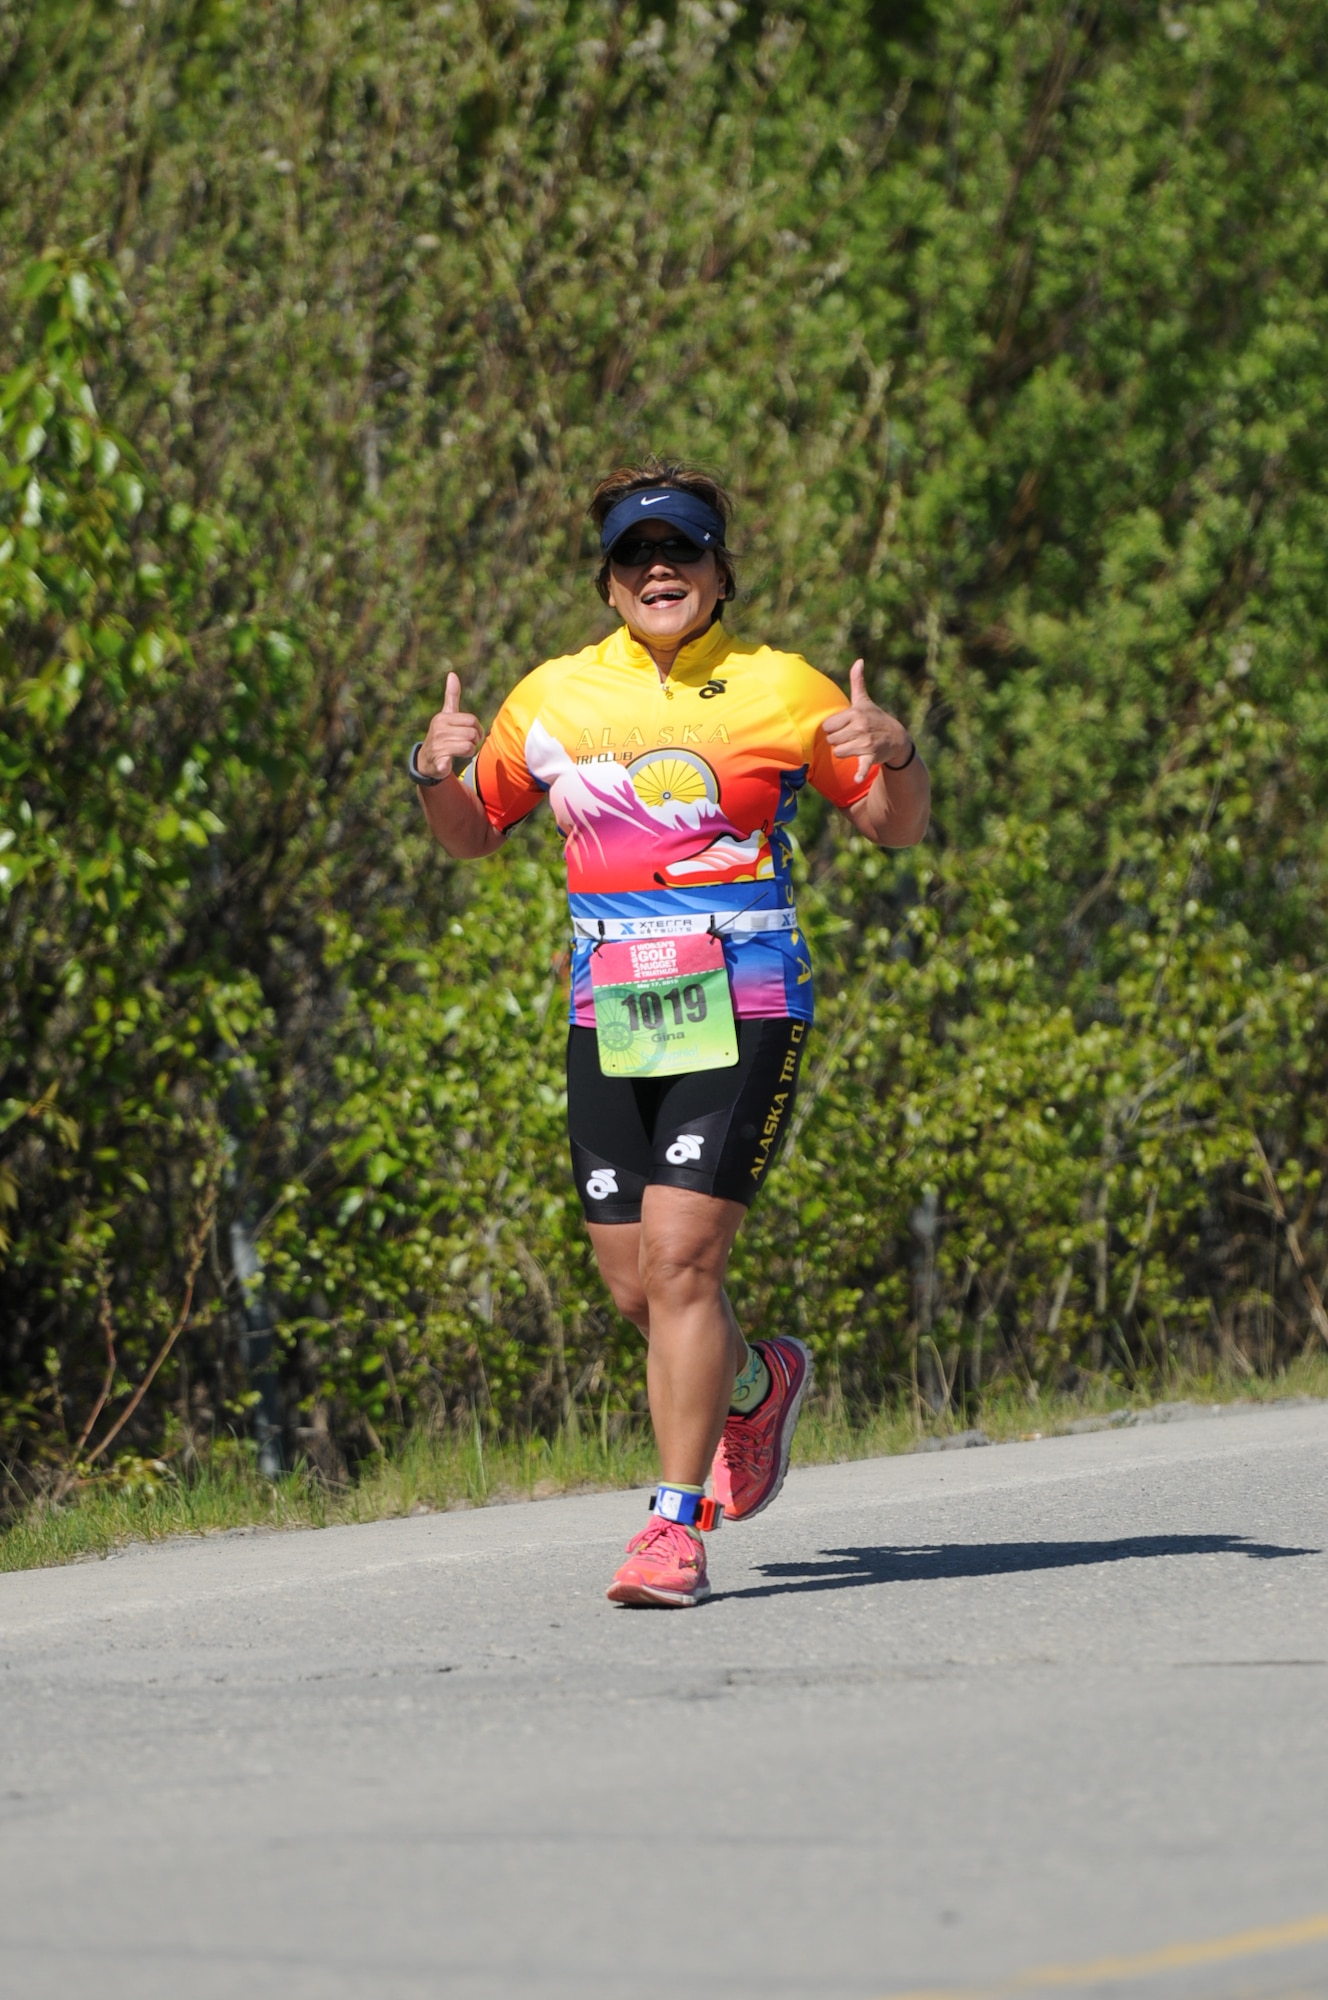 Maj. Gina Gorski, 477th Aerospace Medicine Flight interim commander and operations officer, participates in an annual triathlon in Anchorage, Alaska May 17. Gorski, who says participating in a triathlon was a life-long dream, hopes her participation in events like this encourages others to set goals and follow through with them. (Photo courtesy of Alaska Focus Photography)